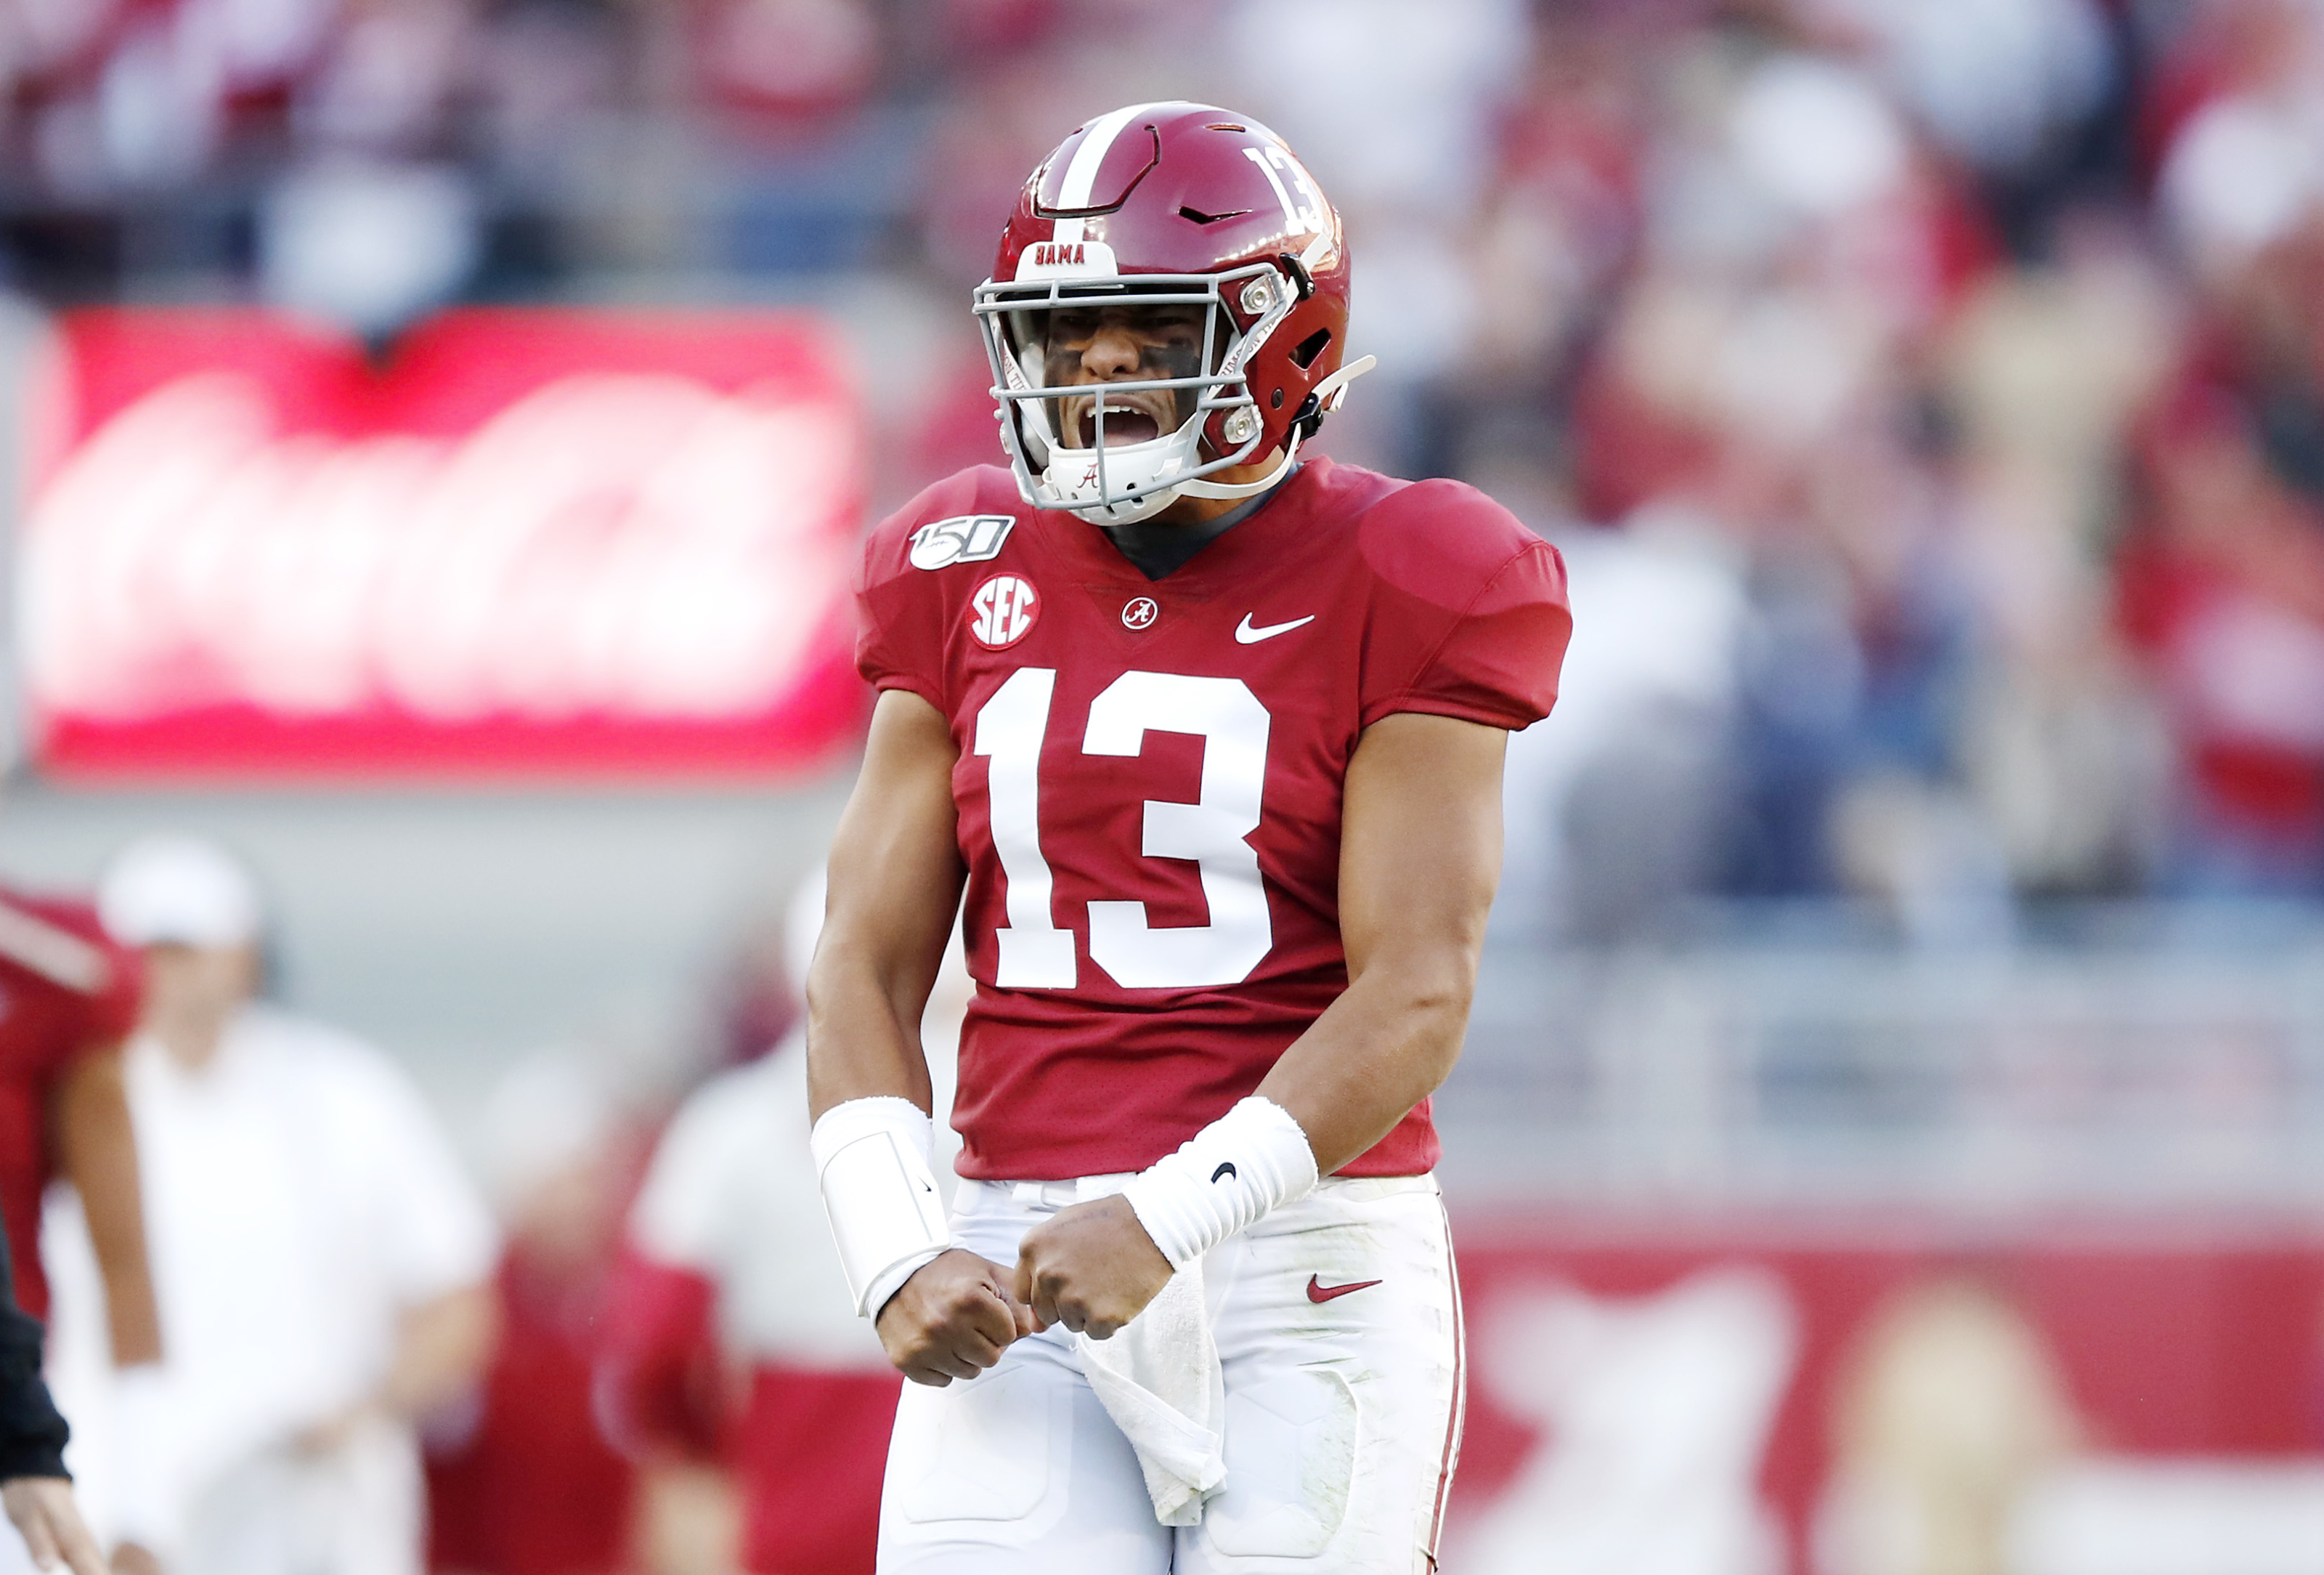 Lions: Tua Tagovailoa declaring for the NFL a touchdown for Detroit